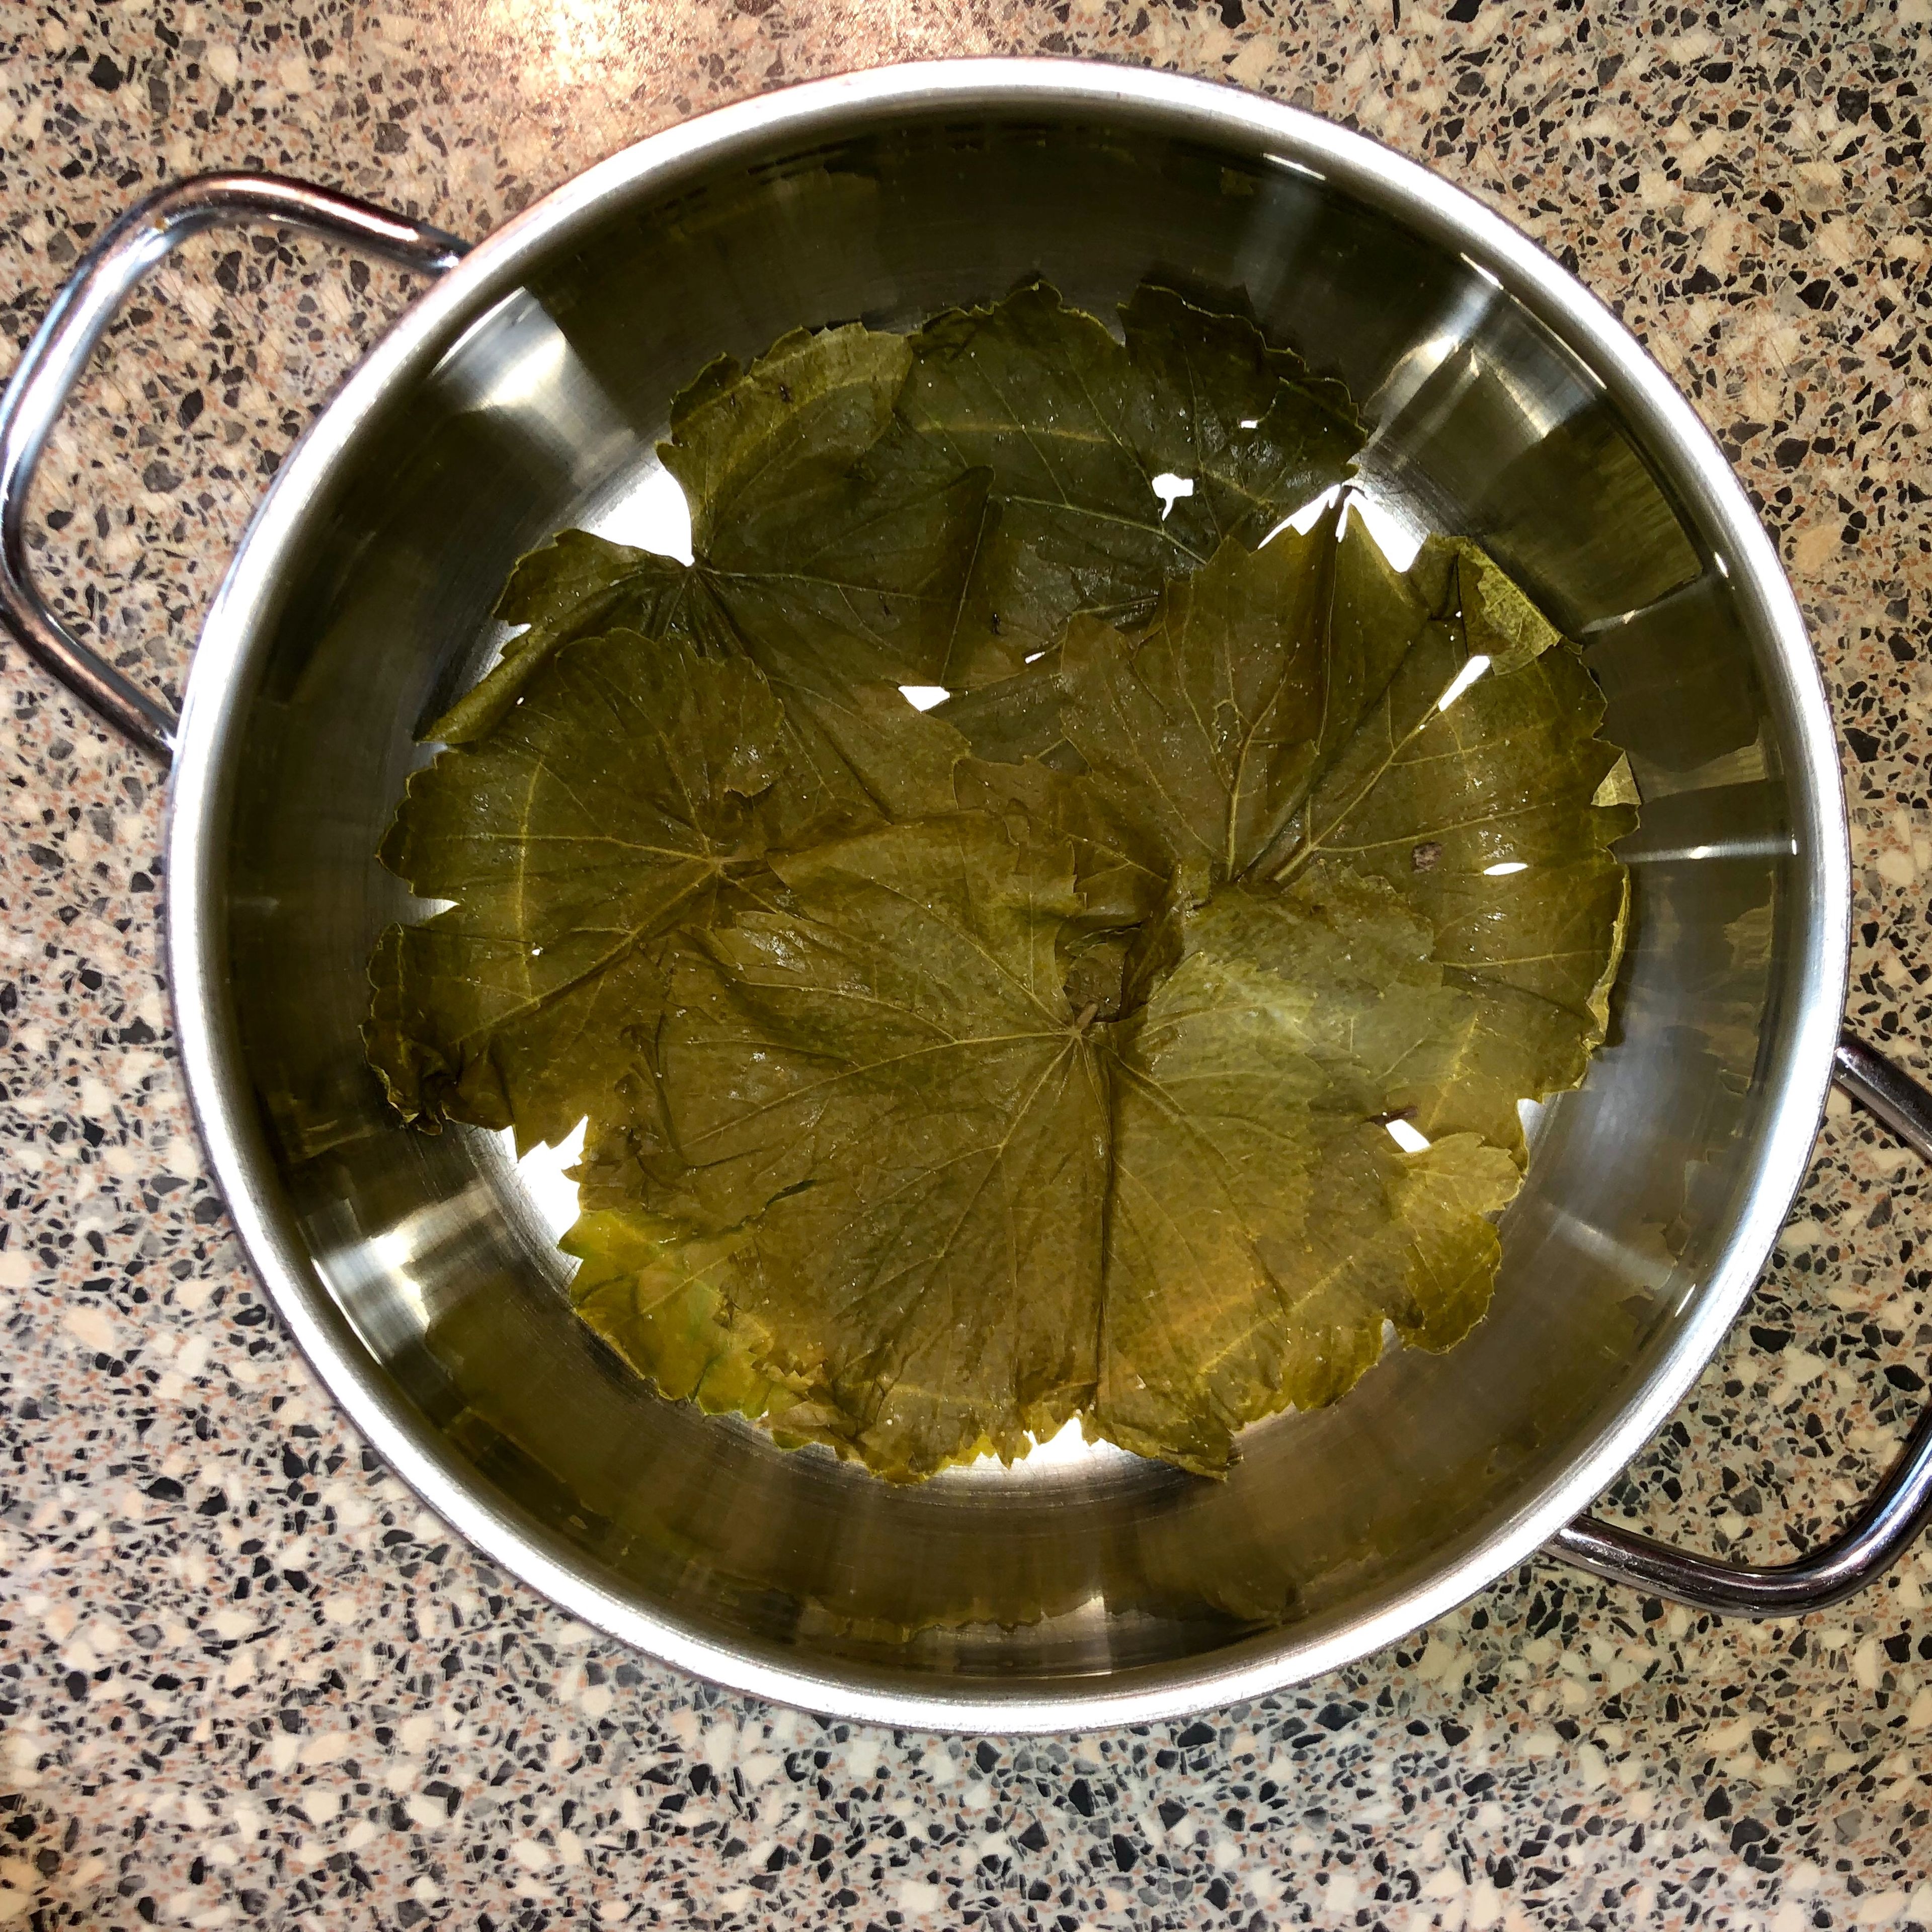 Next, prep your pot. Place some grape leaves on the bottom of a medium to large pot to prevent the dolma from sticking.